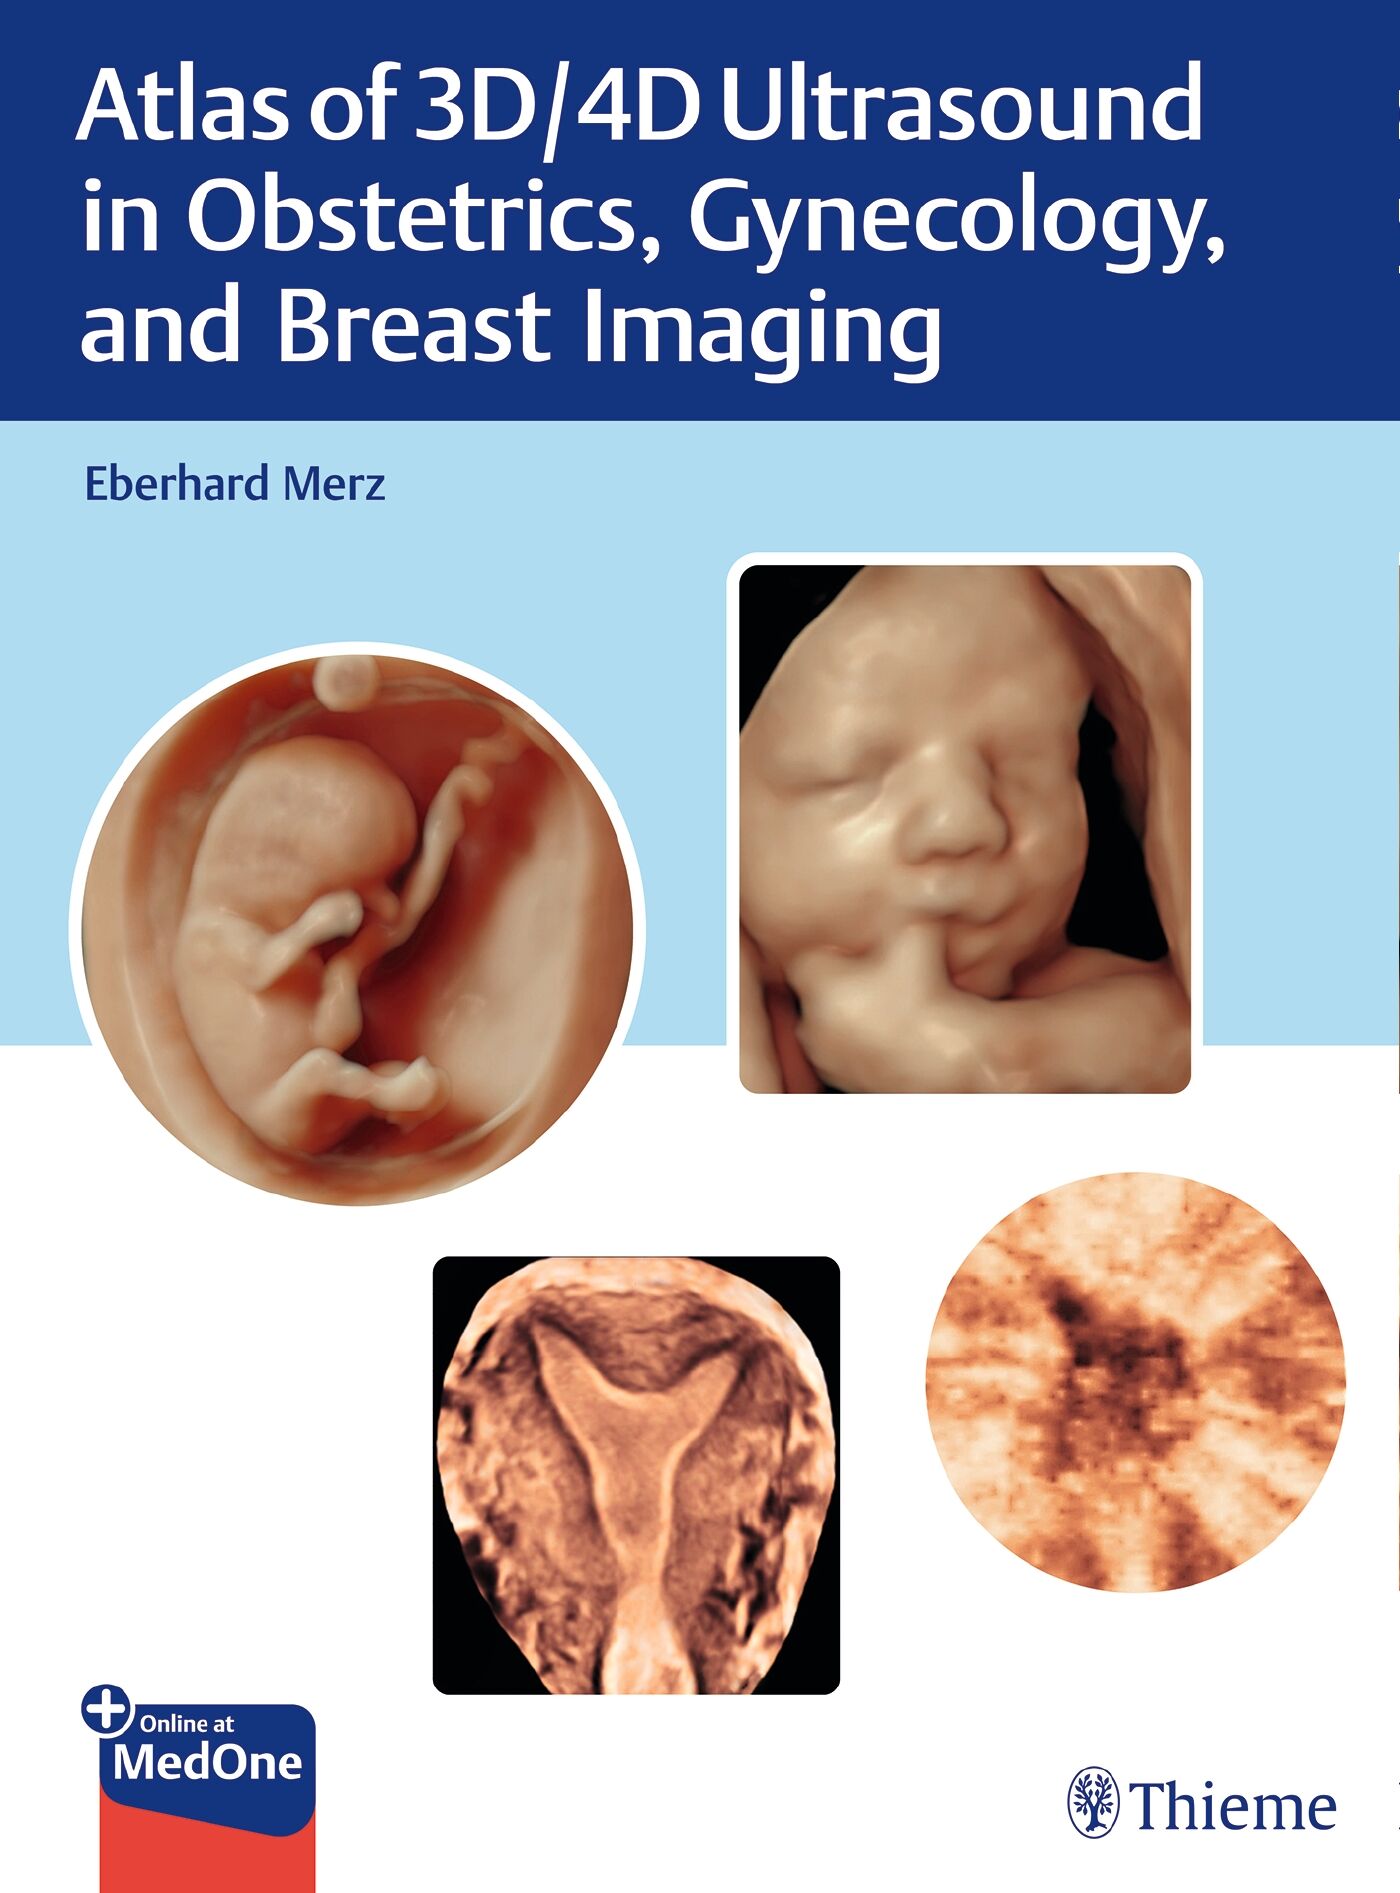 Atlas of 3D/4D Ultrasound in Obstetrics, Gynecology, and Breast Imaging, 9783131764317